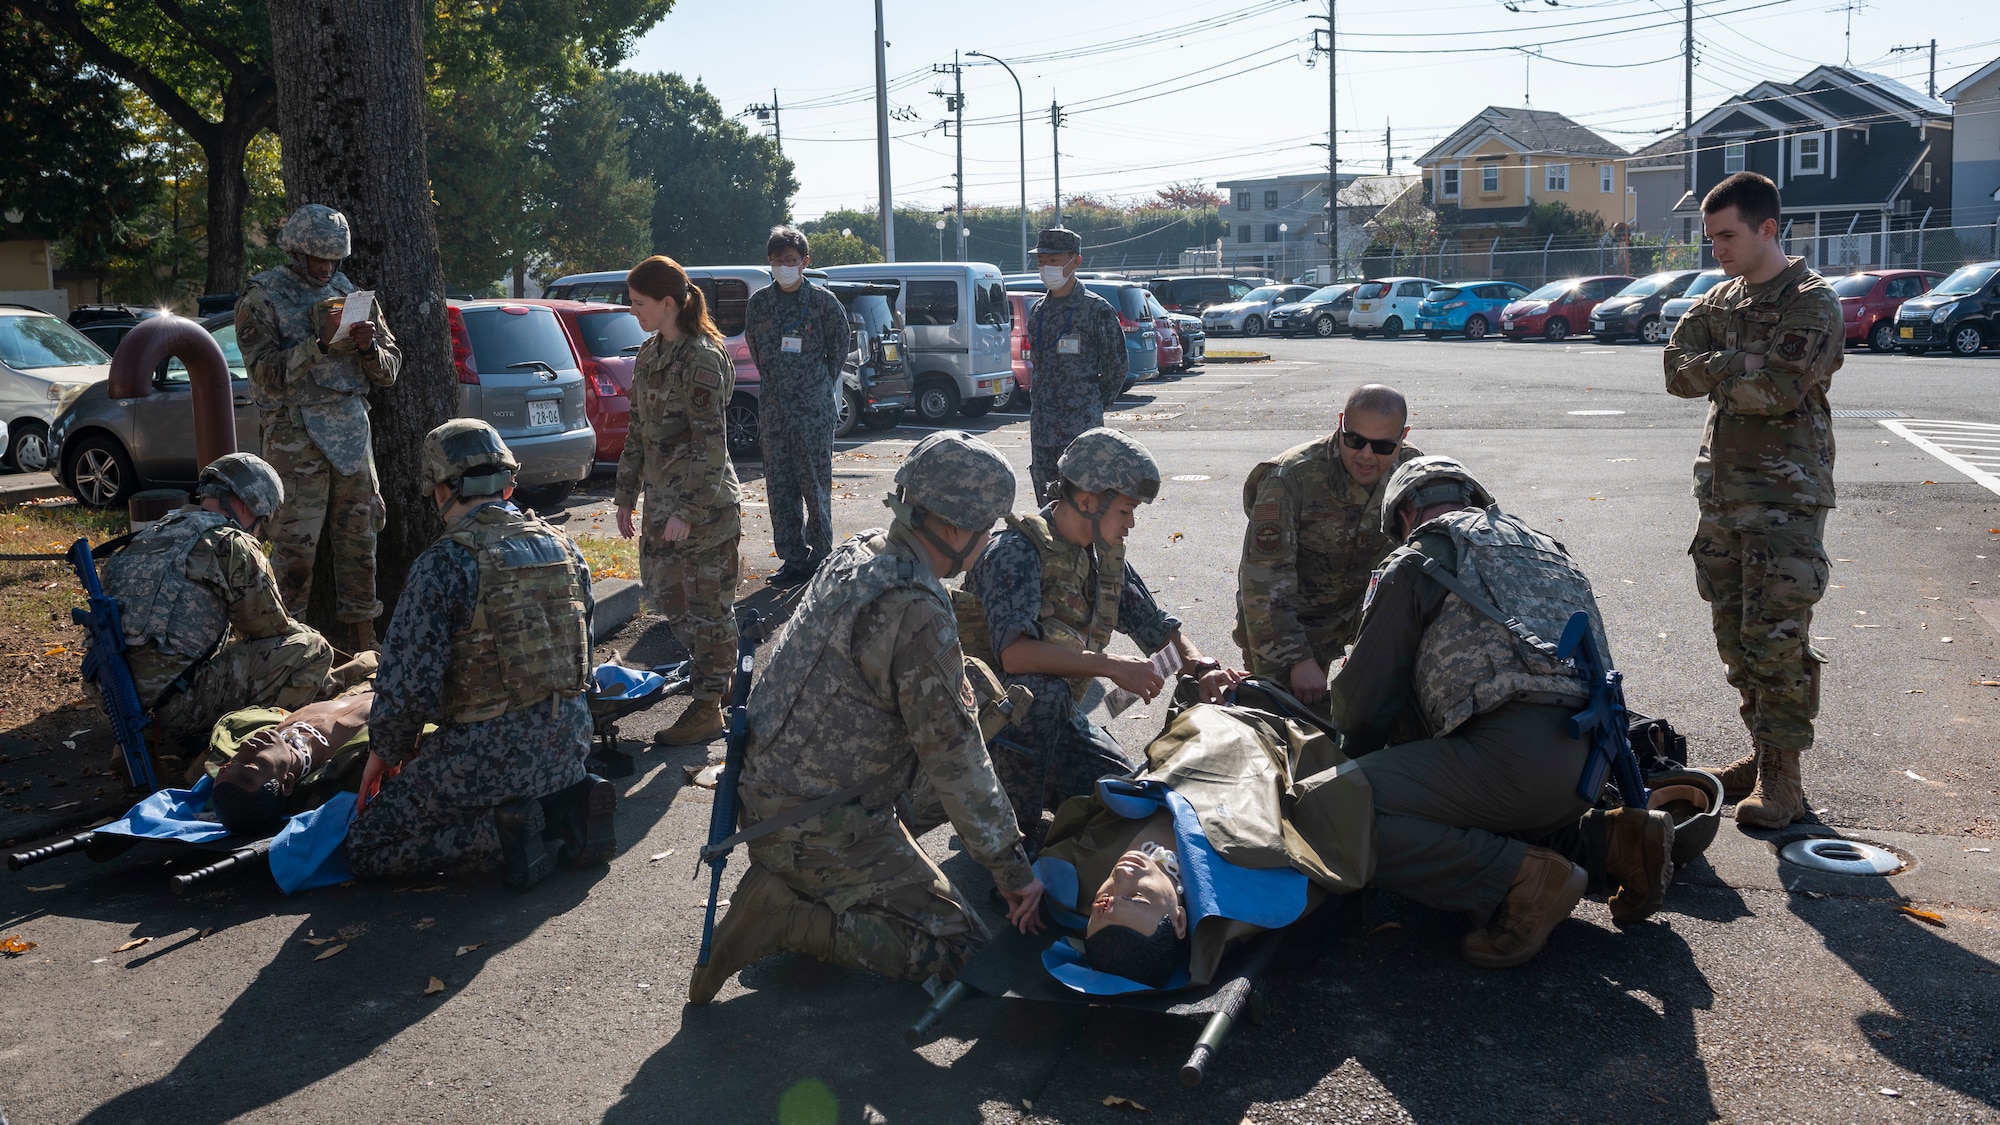 A large group of medics gather around medical training dummies in a parking lot